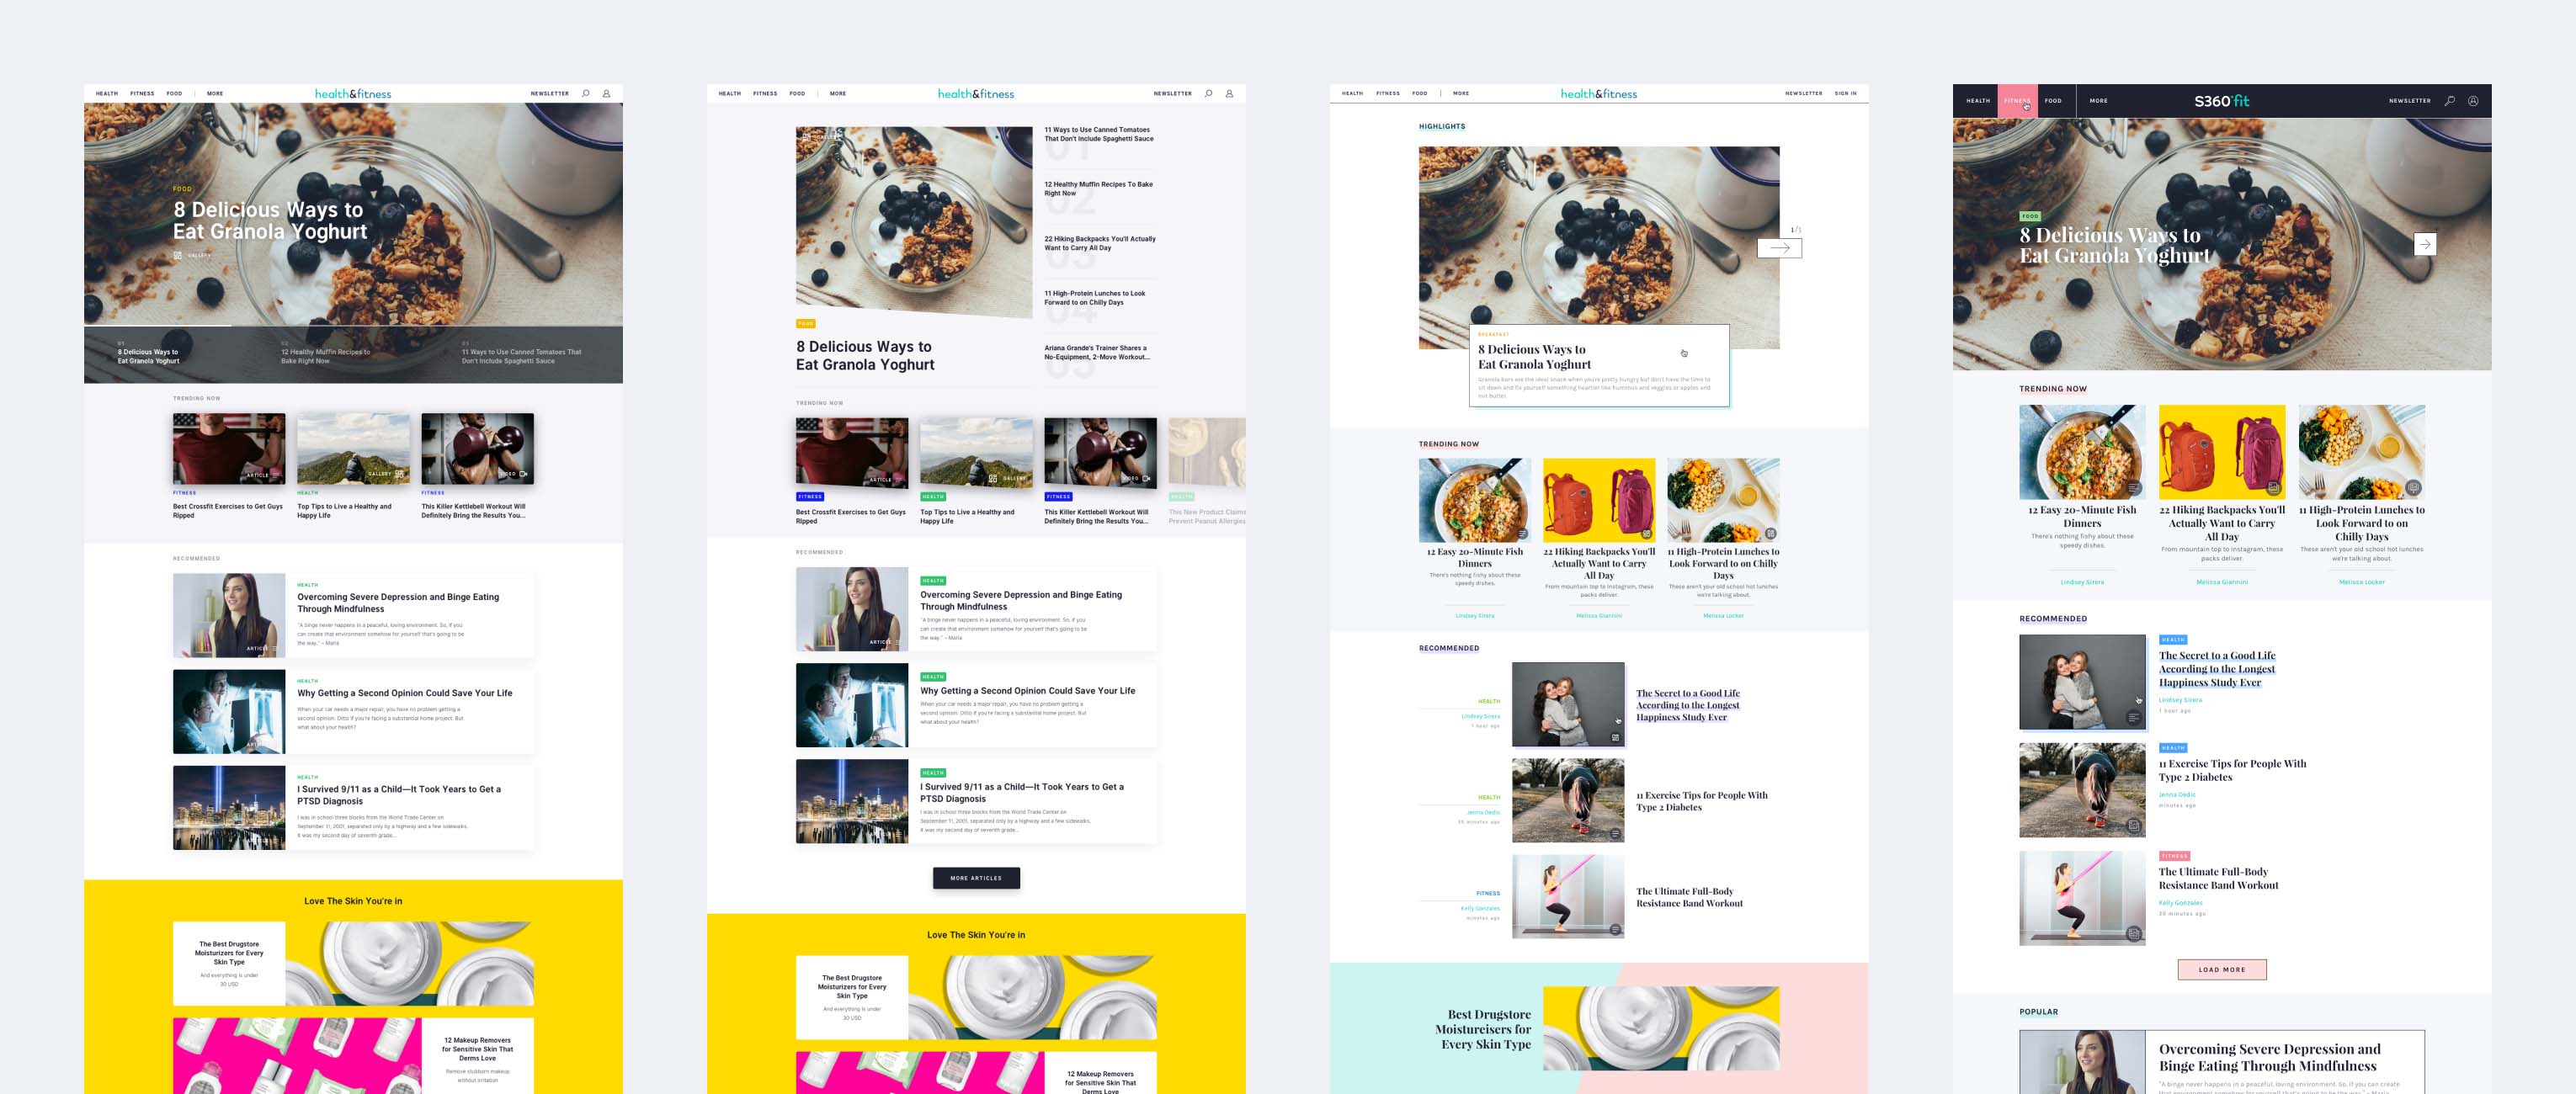 Four versions of the landing page UI, each with different arrangement, visual styles and colors.